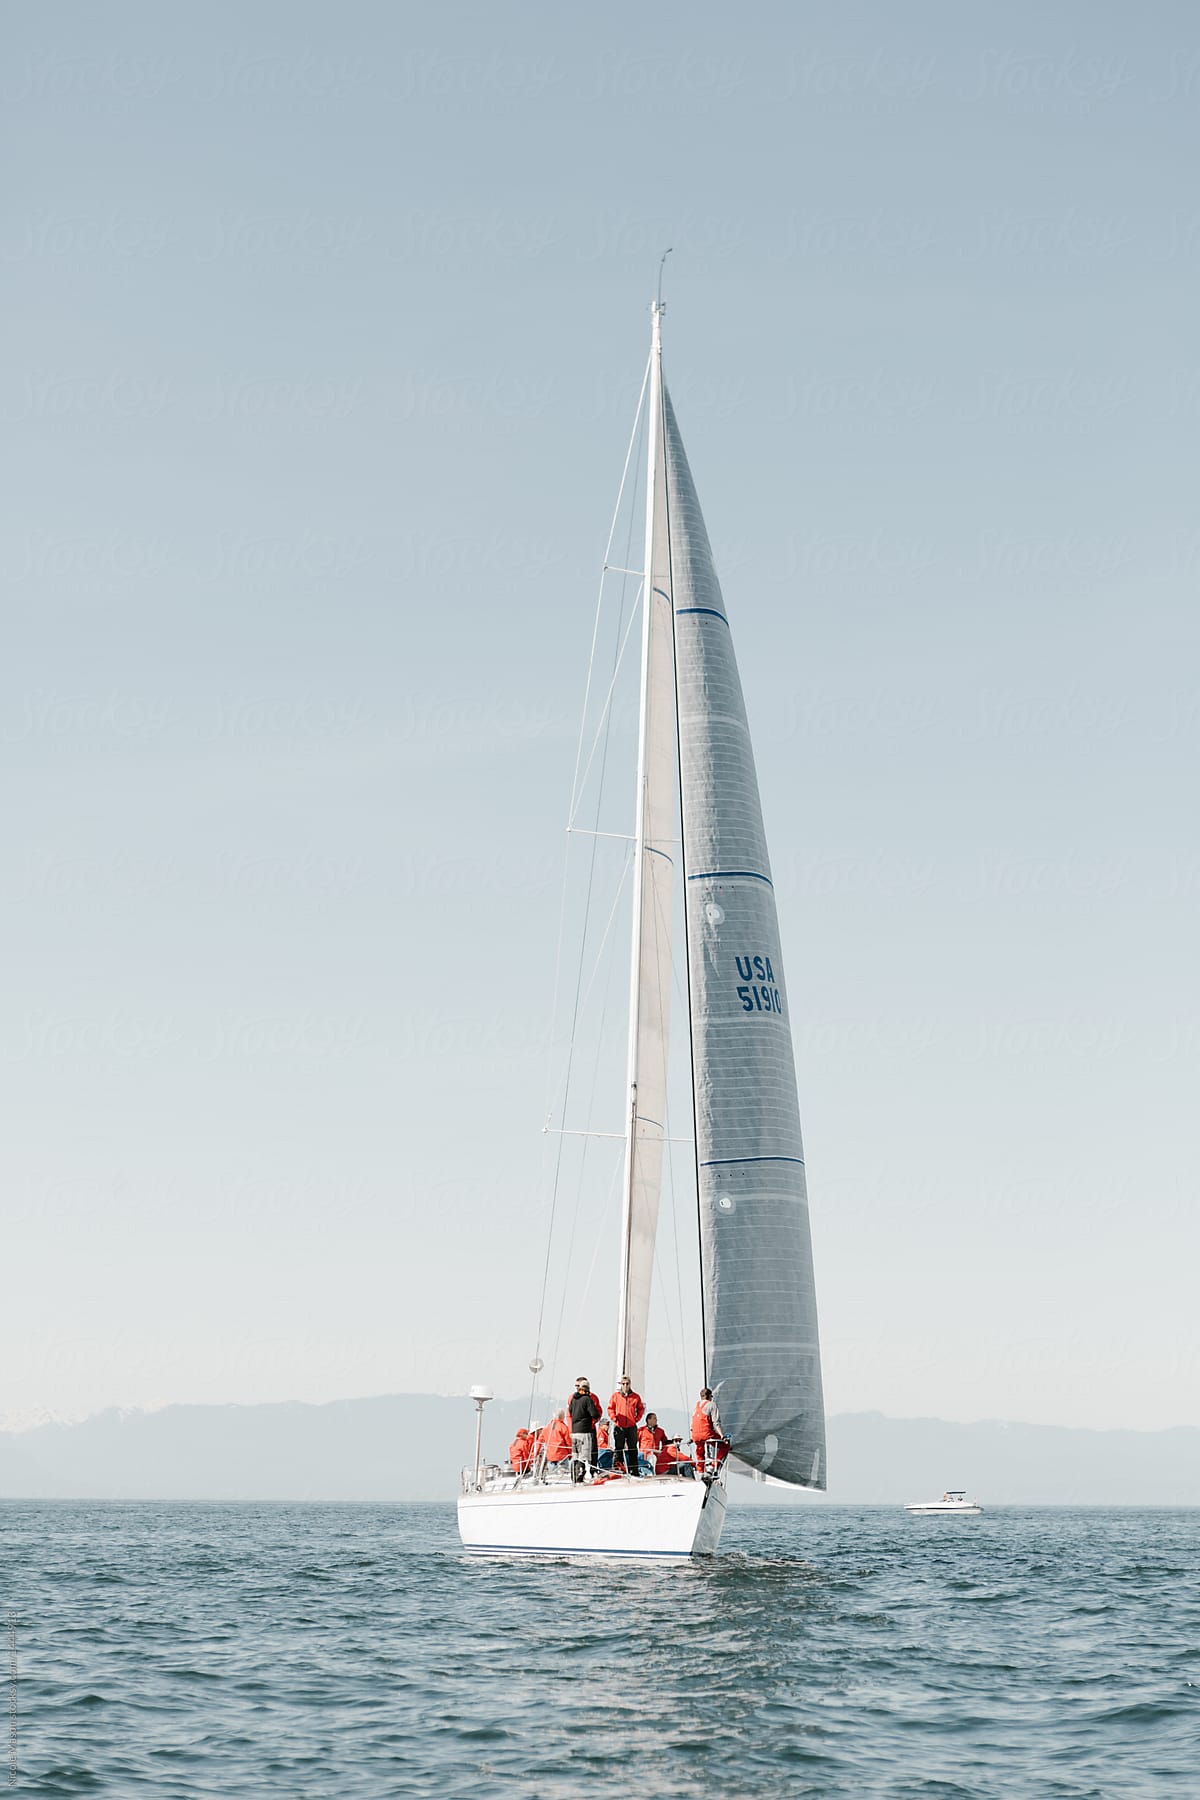 white sailboat at sea in yacht race with crew on board